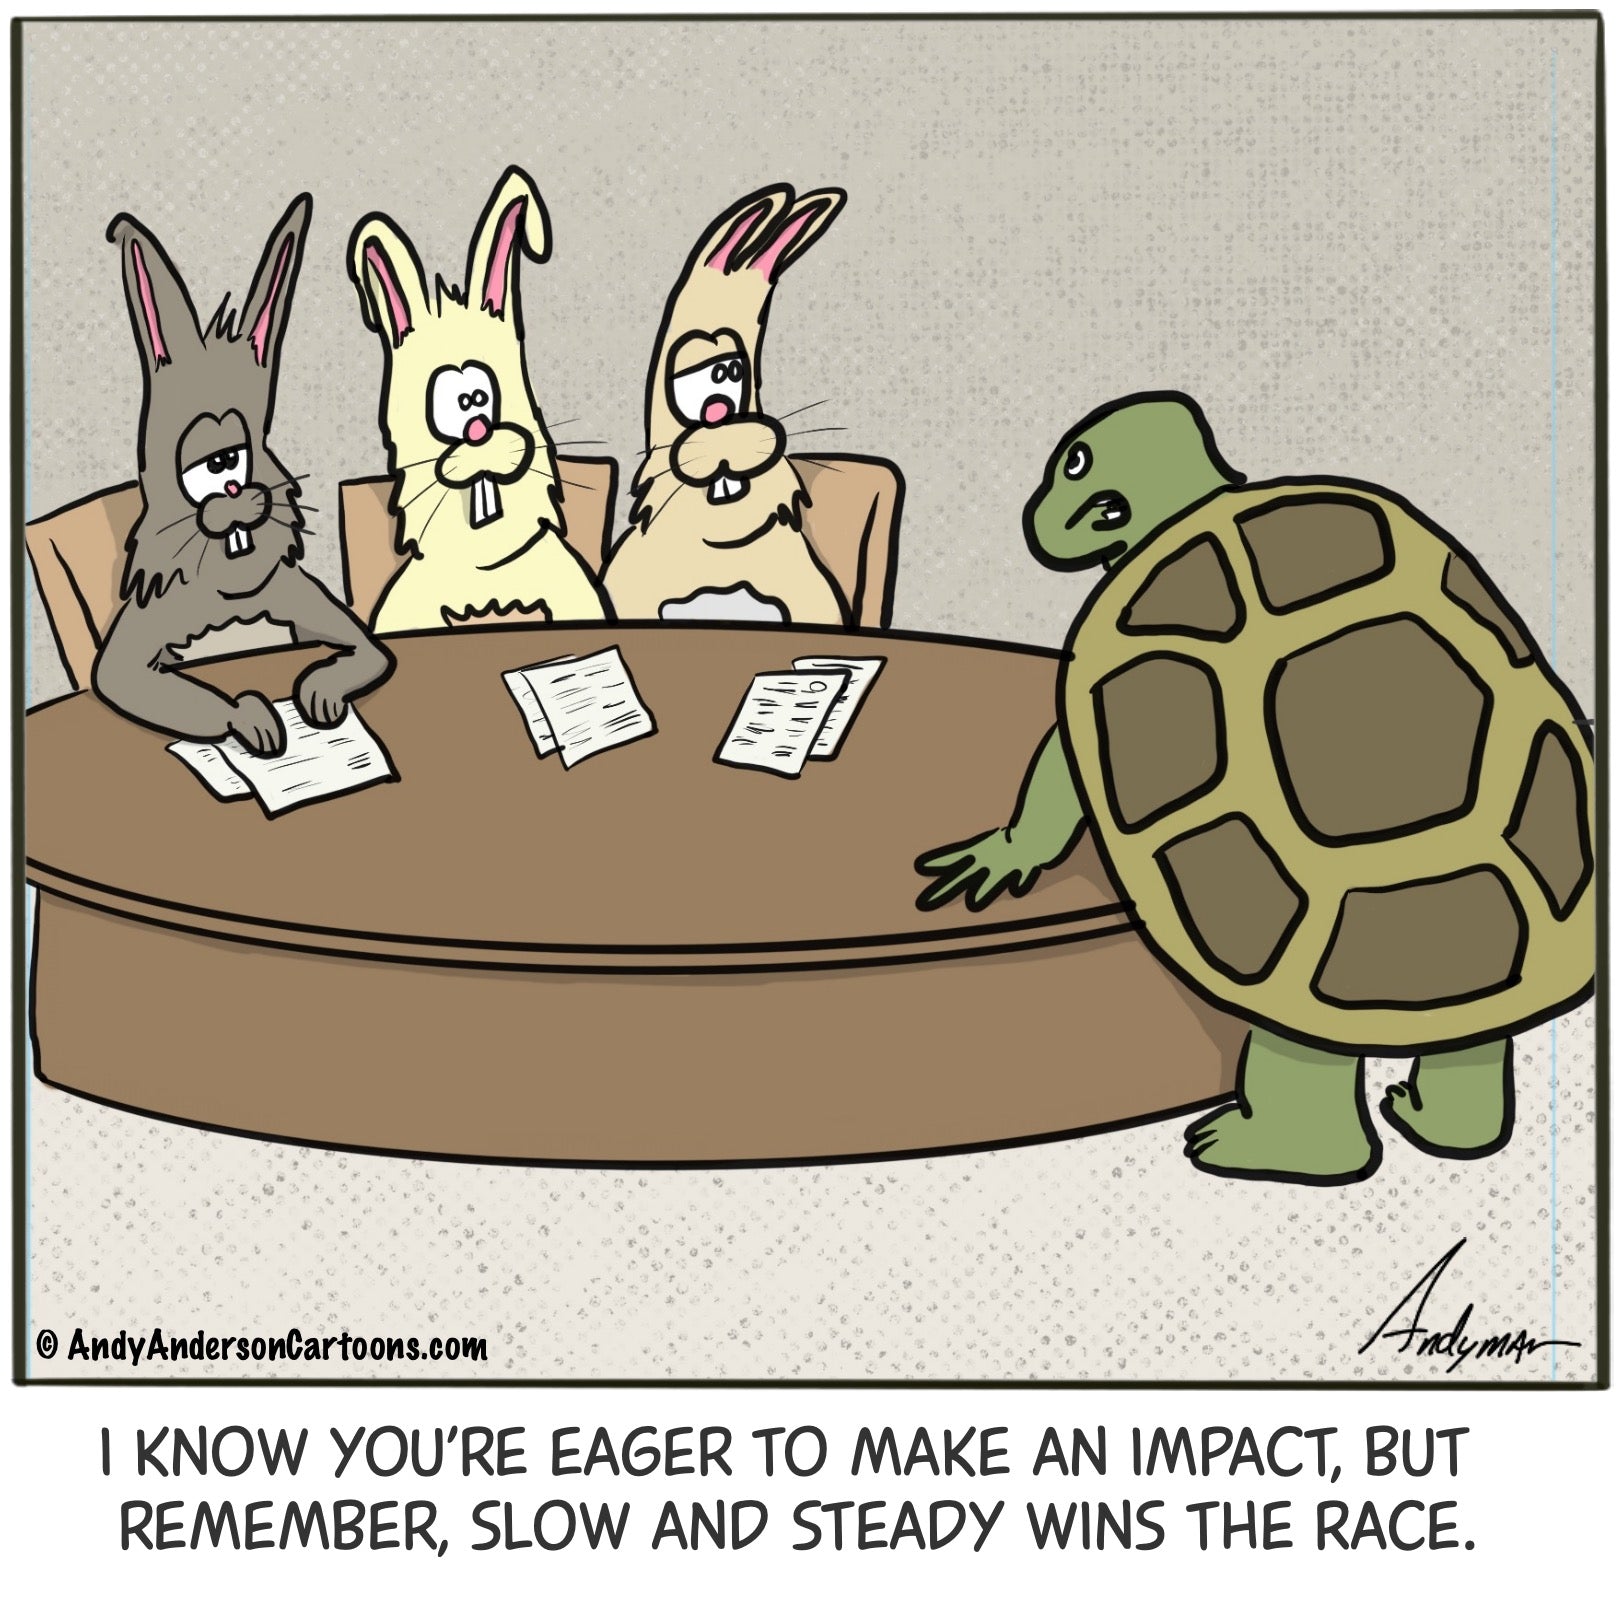 Cartoon about turtle boss telling his rabbit employees slow and steady win the race